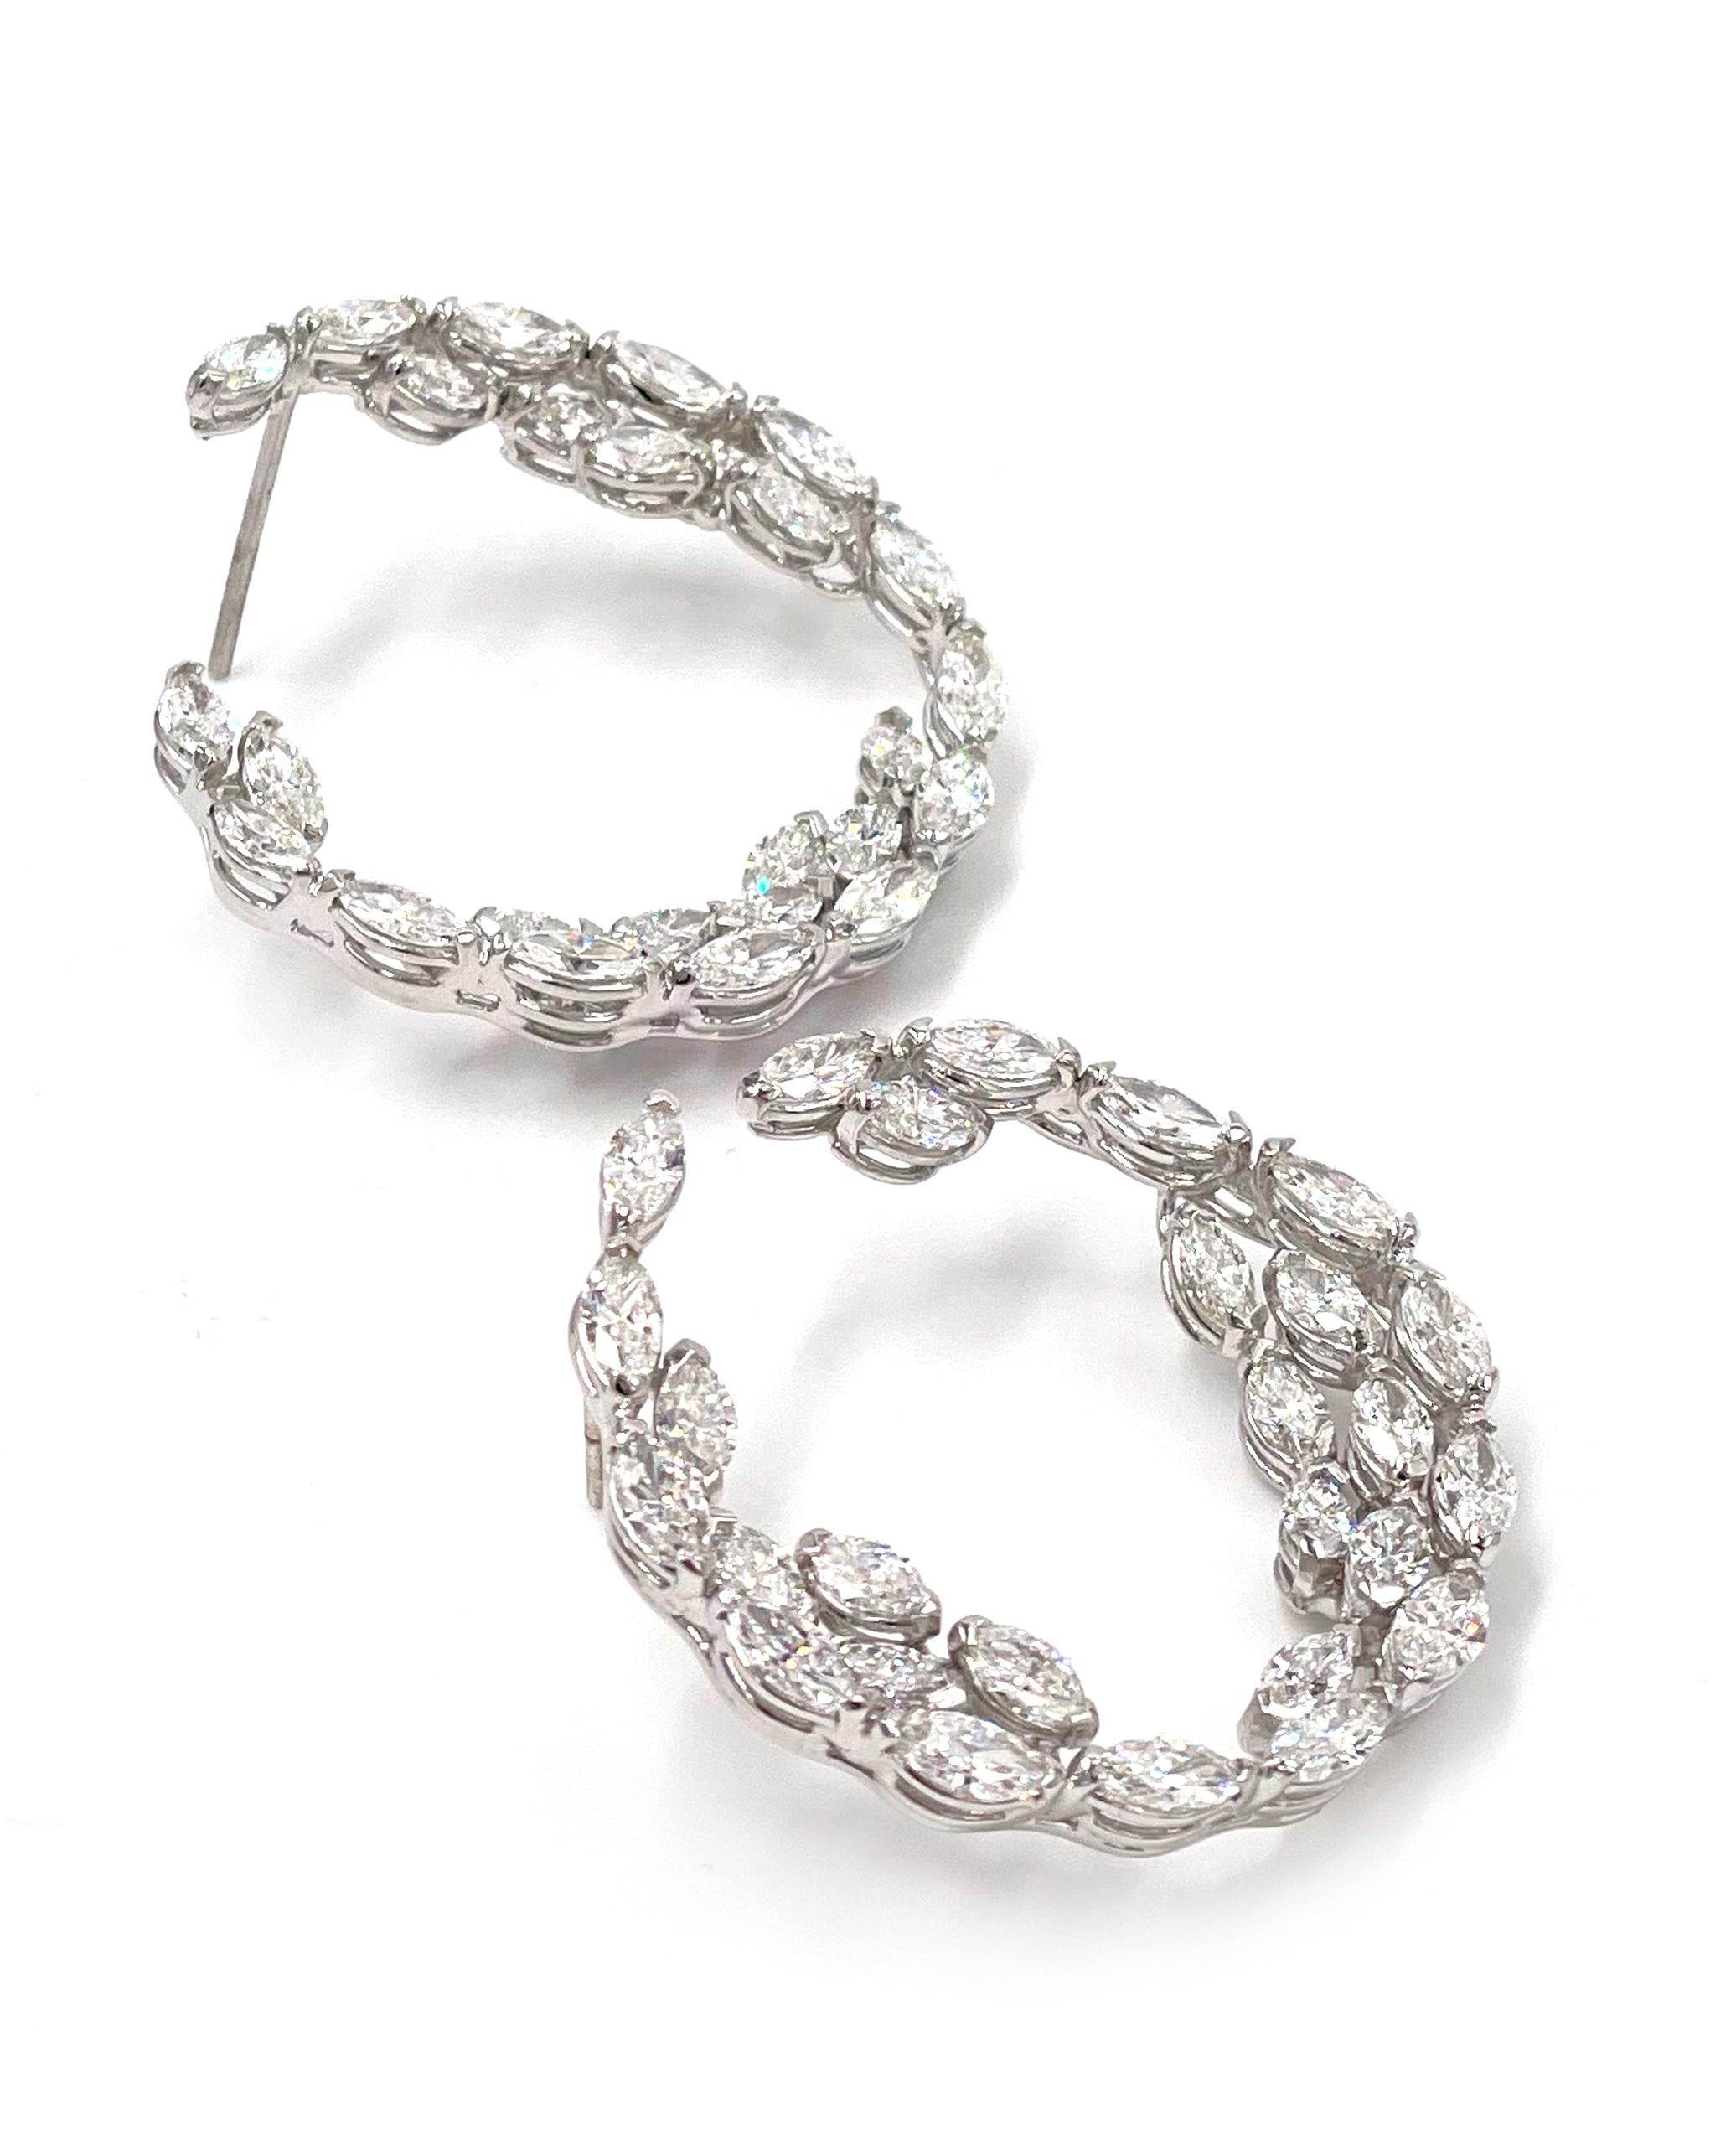 Pictures don't do justice.  Show stopping 18k white gold hoop earrings furnished with 54 marquise shaped diamonds totaling 7.68 carats (F/G color, VS clarity).

* Push backs included.